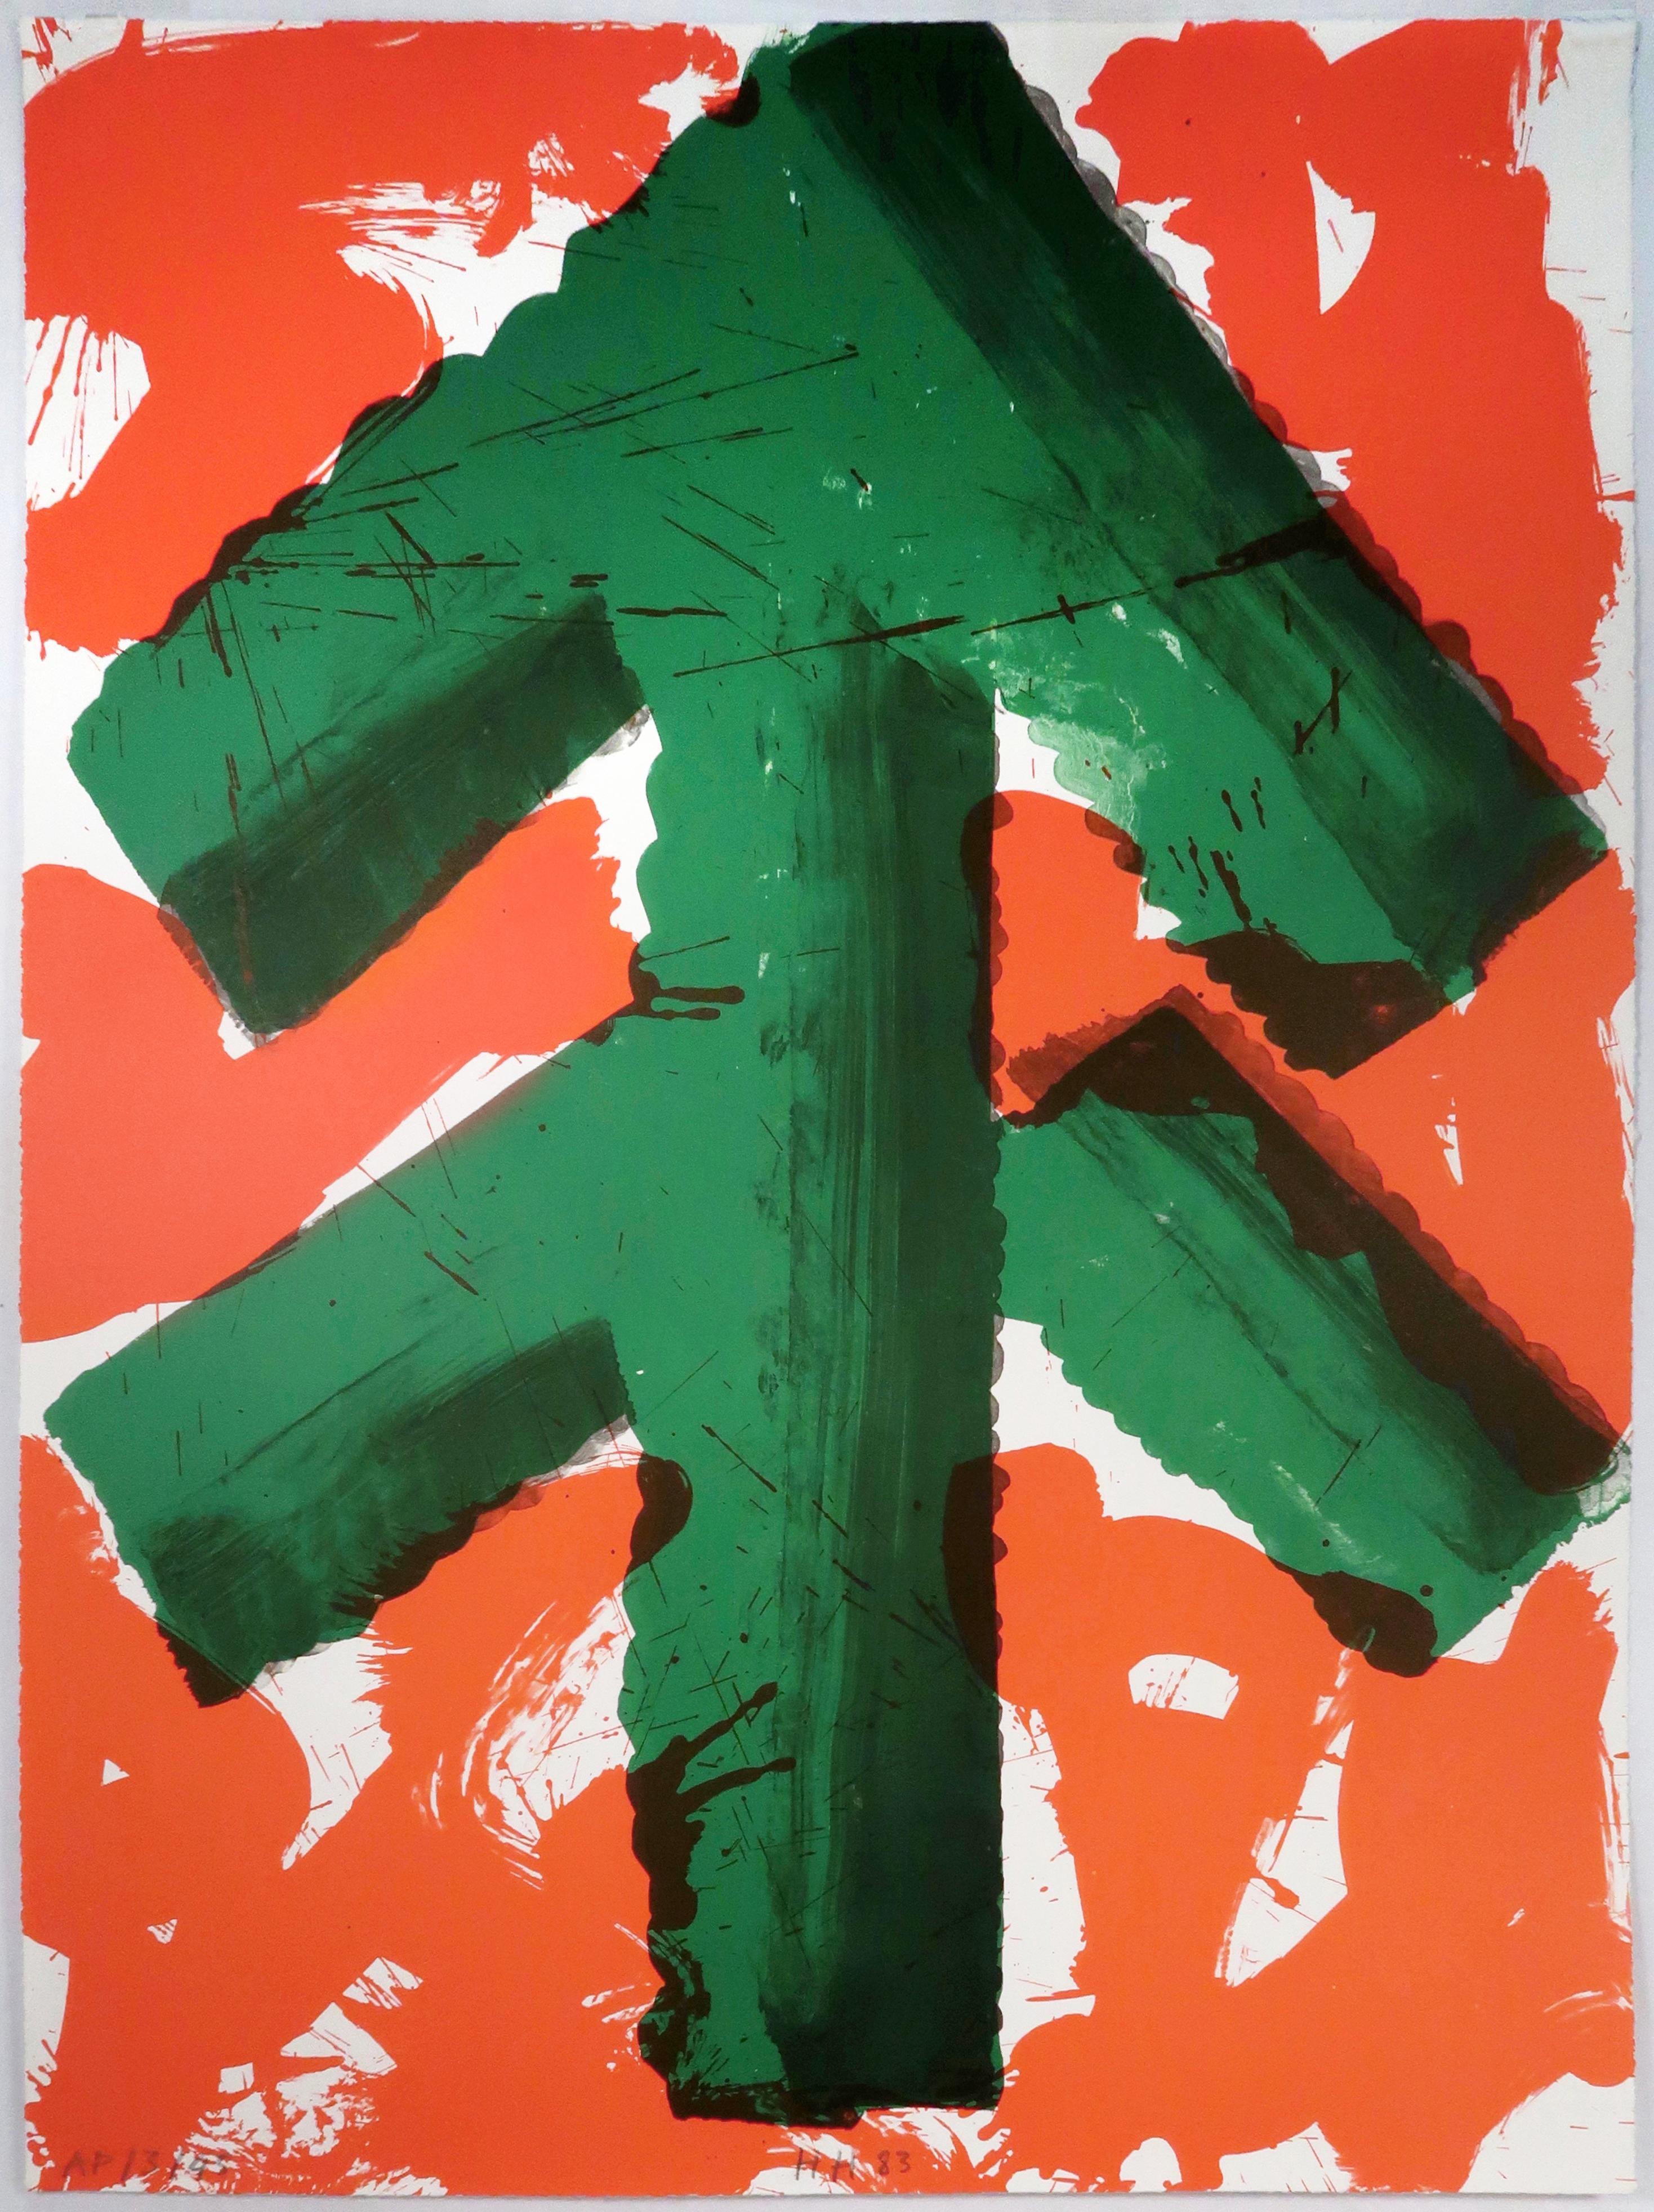 Howard Hodgkin Print - Welcome (Commissioned by Andy Warhol for Winter Olympics 1984, Sarajevo)